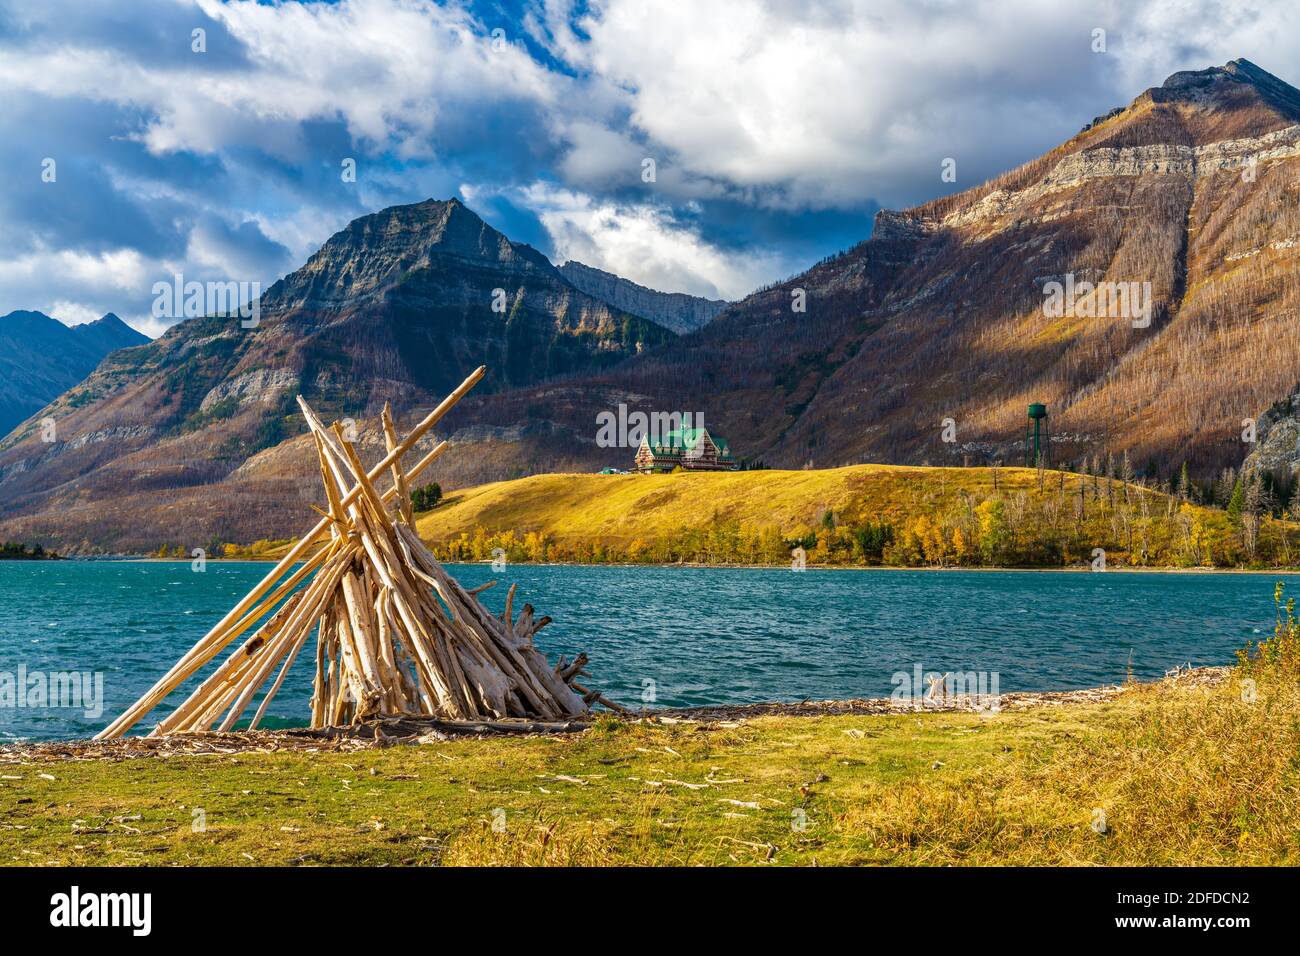 Driftwood Beach, Middle Waterton Lake lakeshore in autumn foliage season morning. Blue sky, white clouds over mountains in the background. Landmarks i Stock Photo